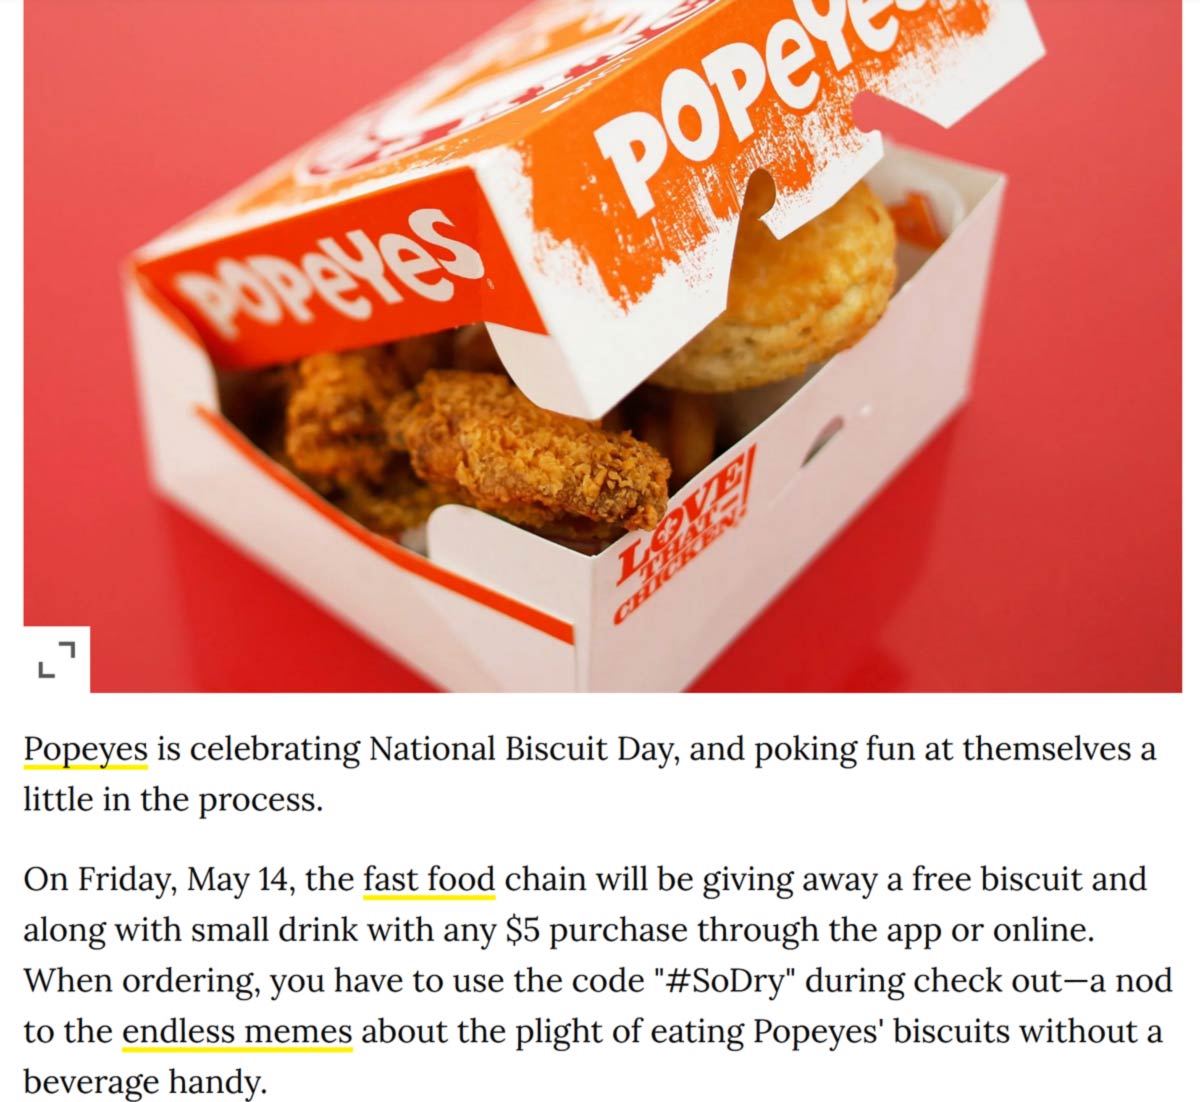 Popeyes restaurants Coupon  Free bisuit & drink with $5 spent Friday at Popeyes restaurants mentioning code #SoDry #popeyes 